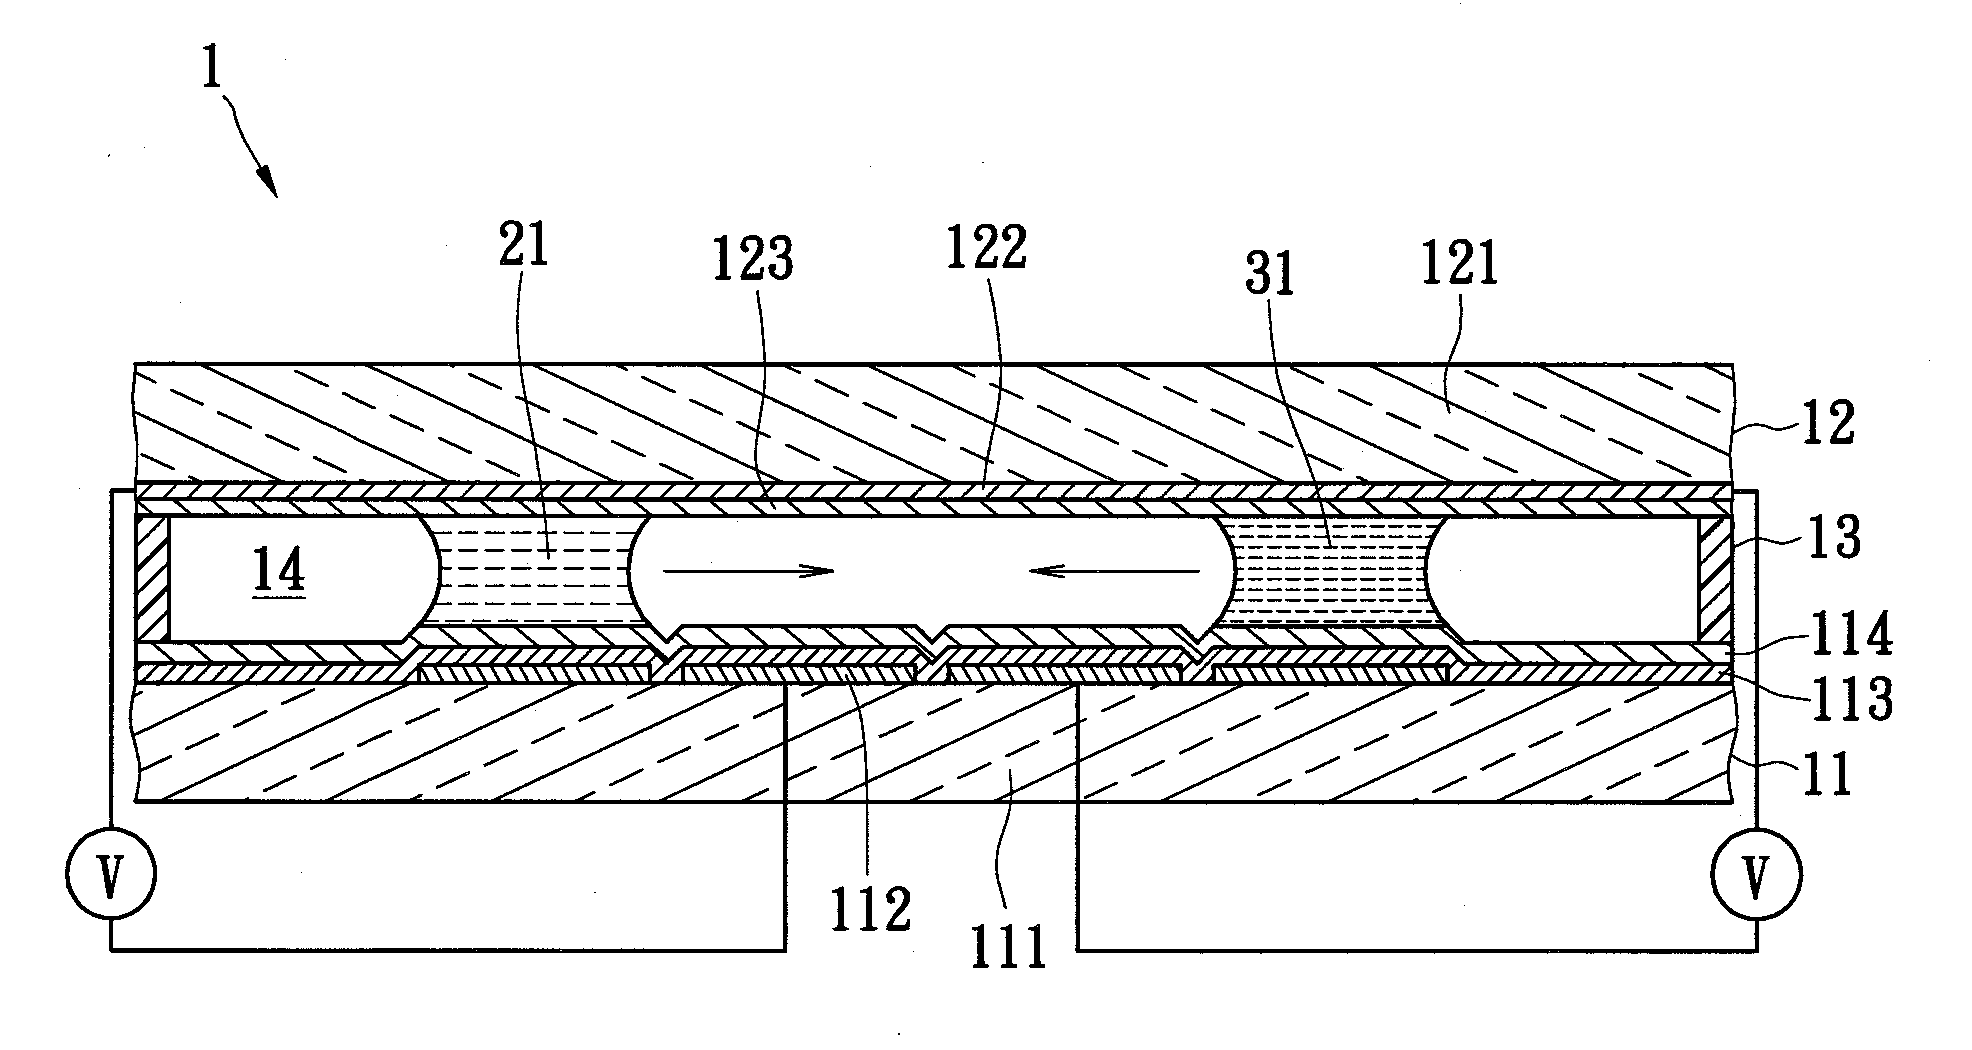 Microfluidic system and method for creating an encapsulated droplet with a removable shell